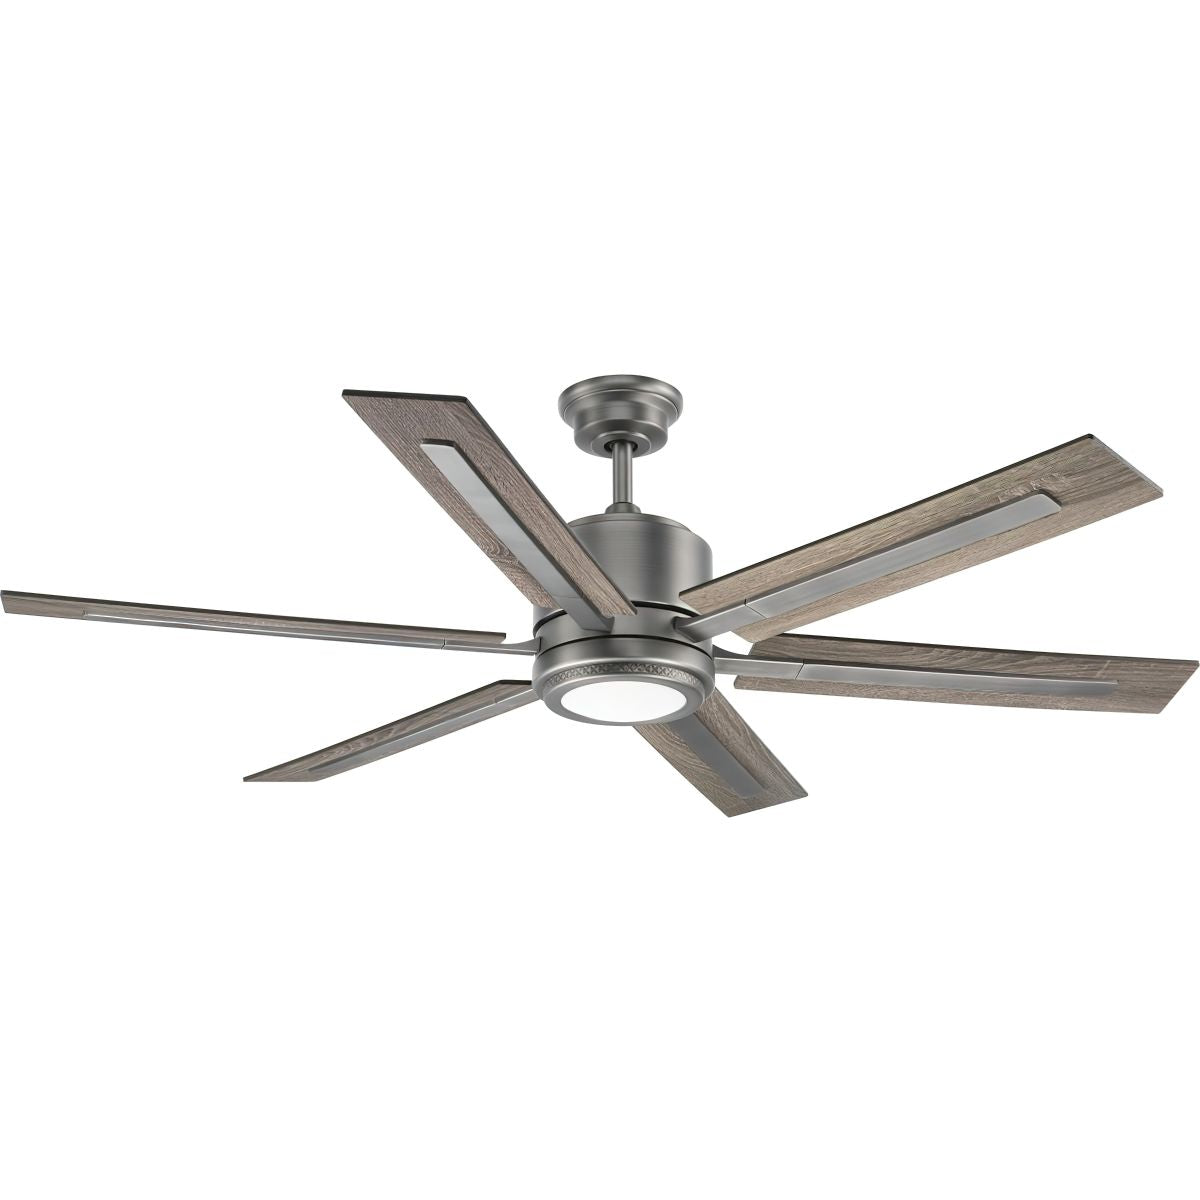 Glandon 60 Inch Ceiling Fan With Light And Remote